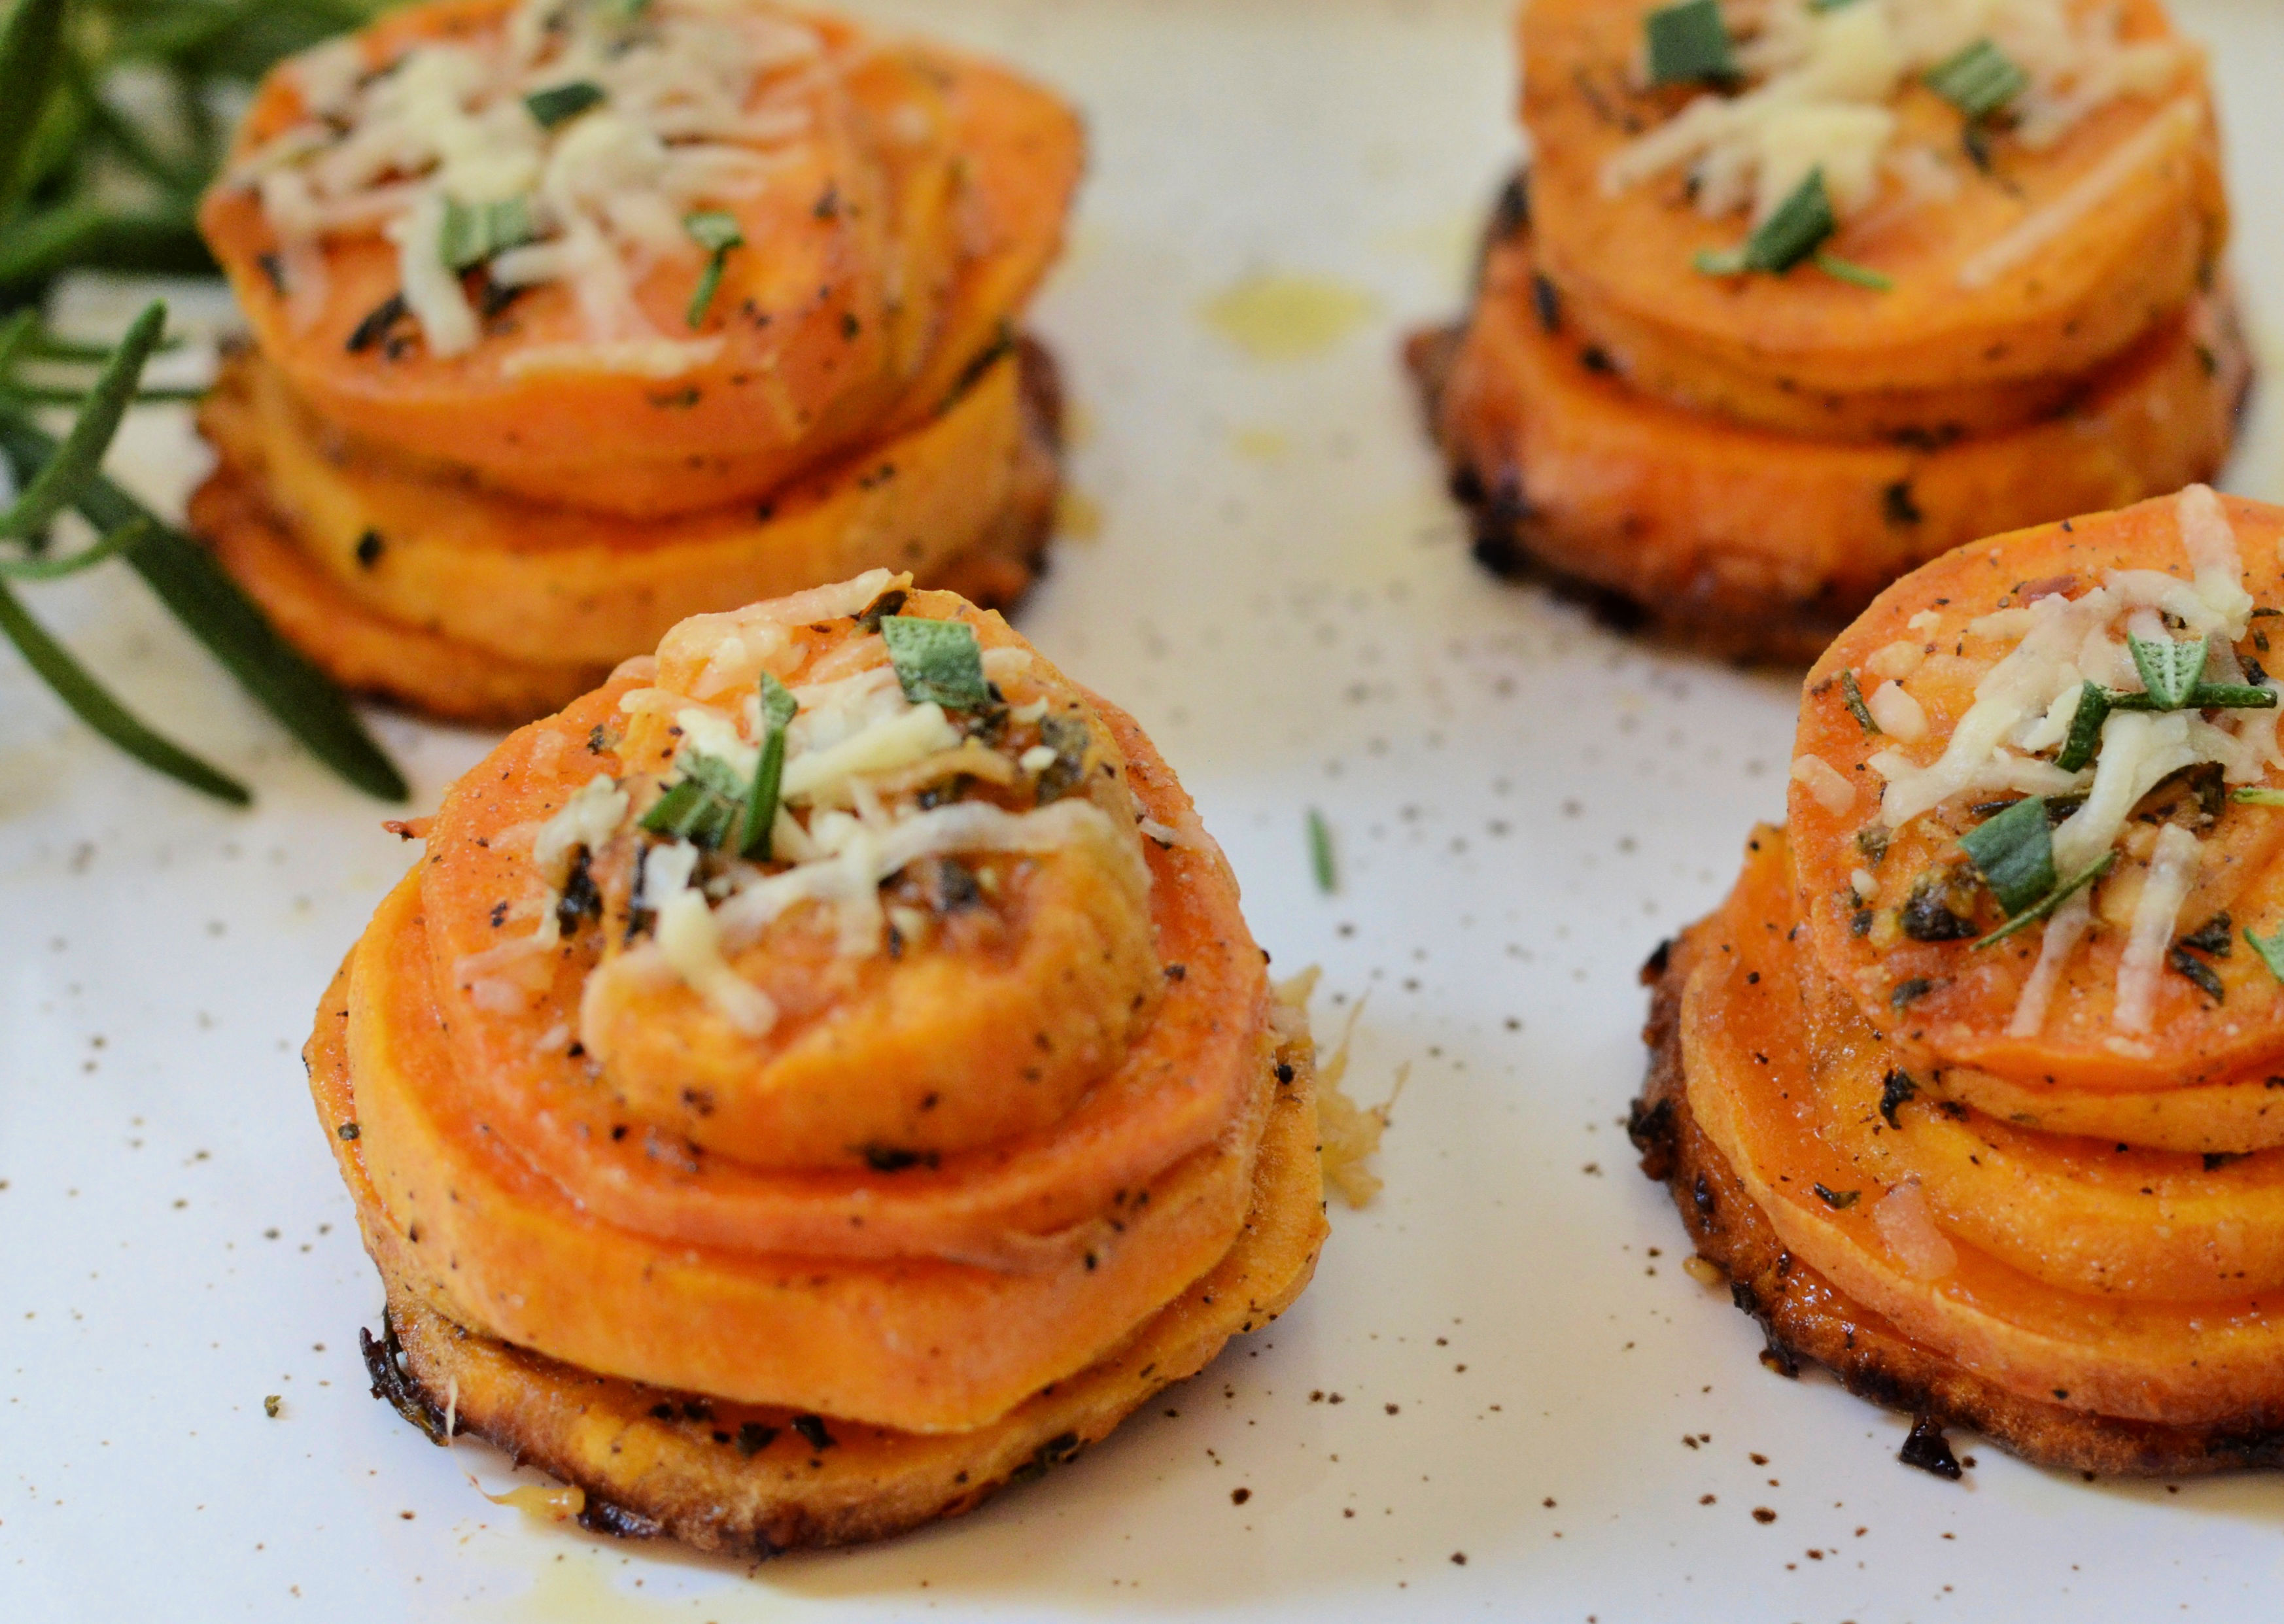 https://ourfuturehomestead.com/wp-content/uploads/2019/10/sweet-potato-stackers-close-up.jpg